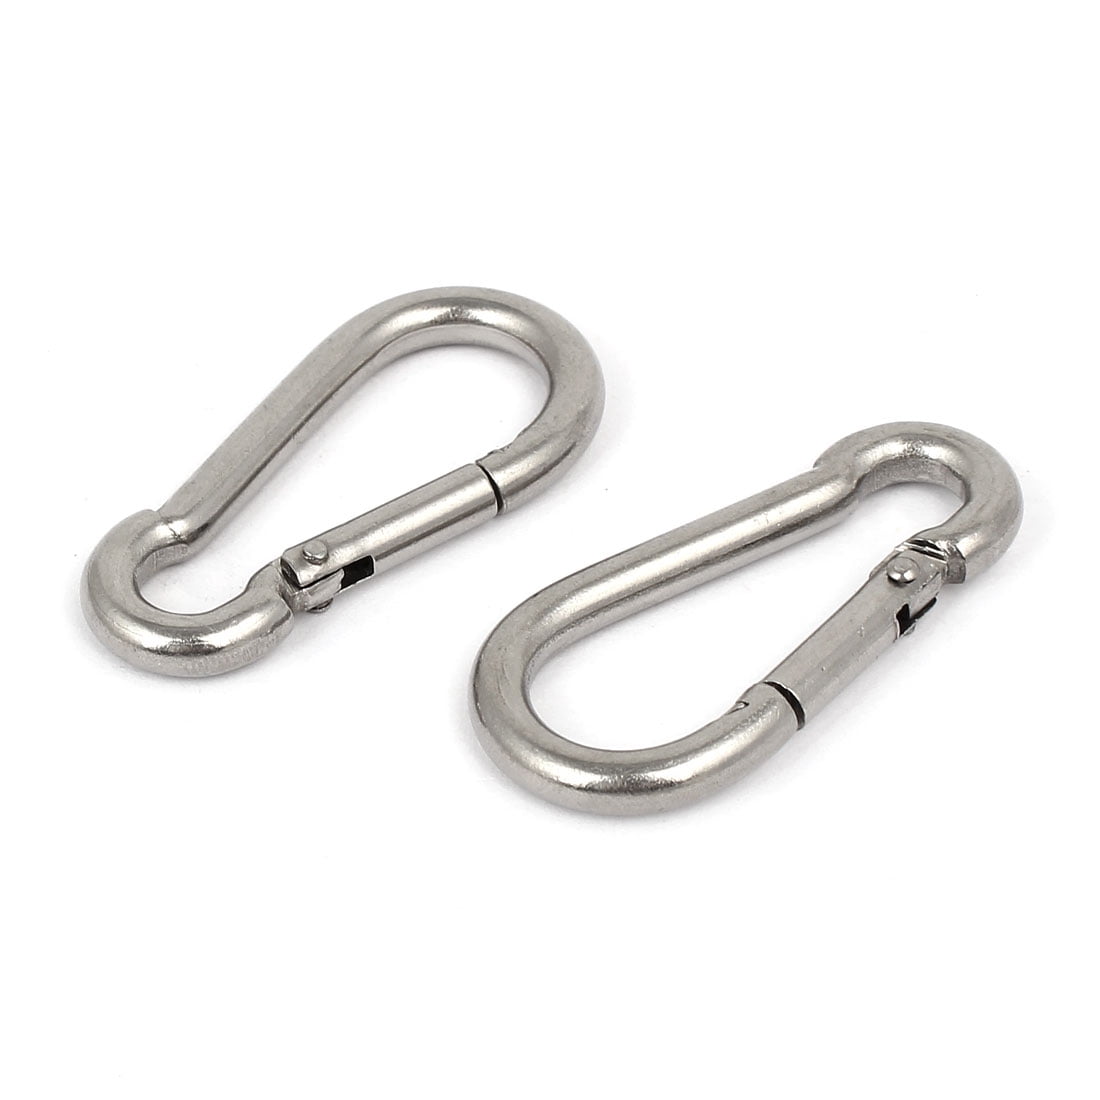 Details about   5PCS 304 Stainless Steel Snap Spring Hook With Eyelet M5 50.5*24.8*7mm 